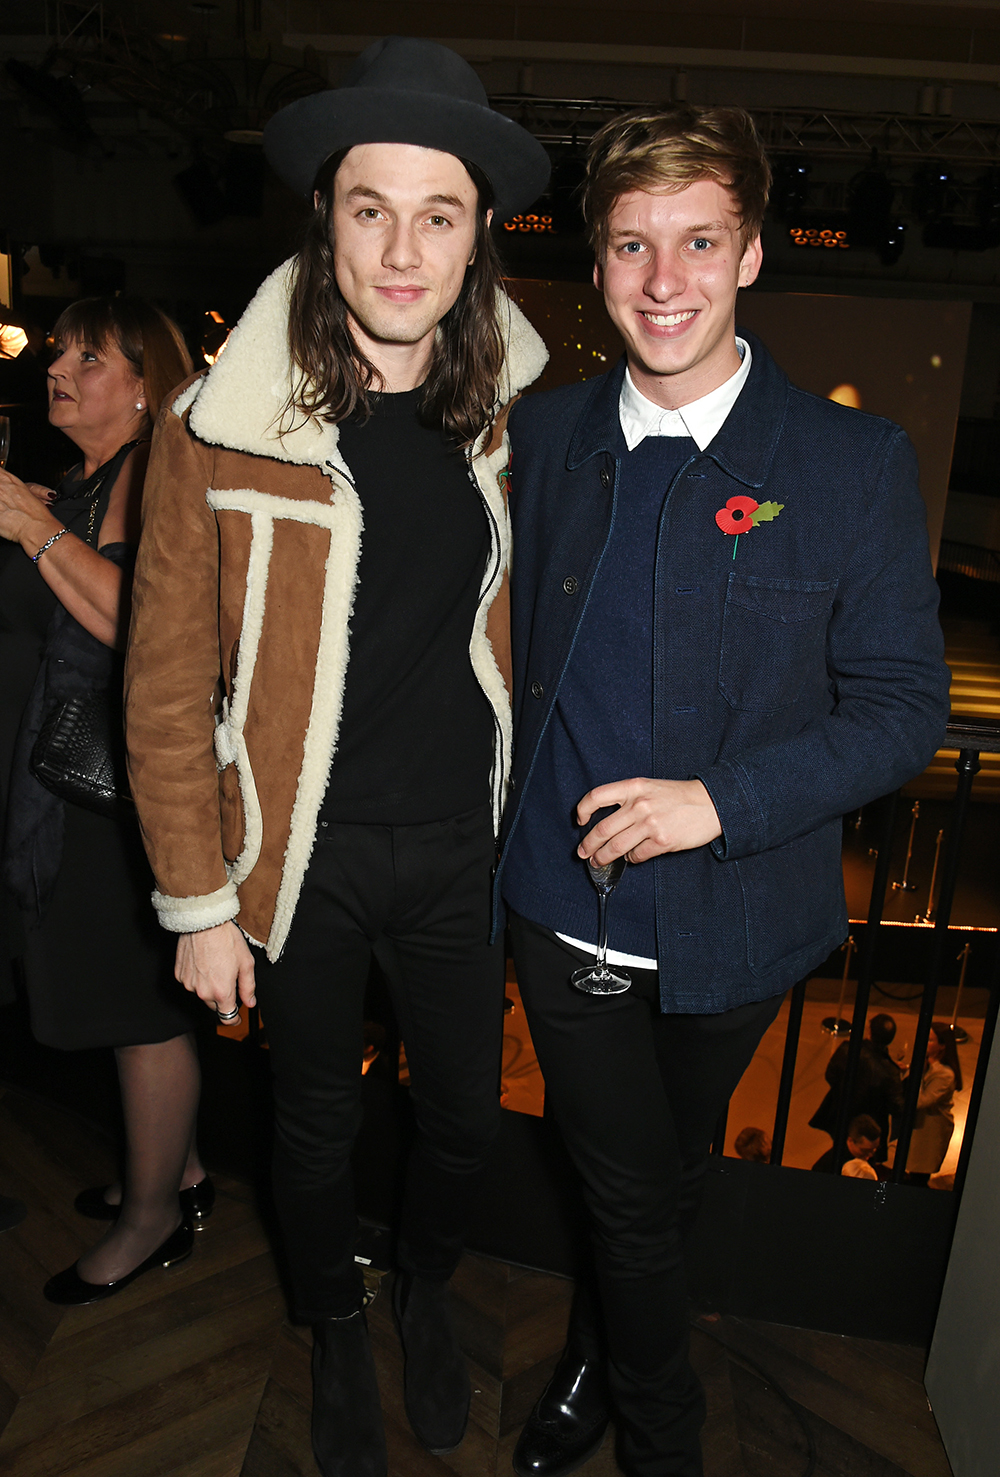 James Bay and George Ezra at the Burberry festive film premiere